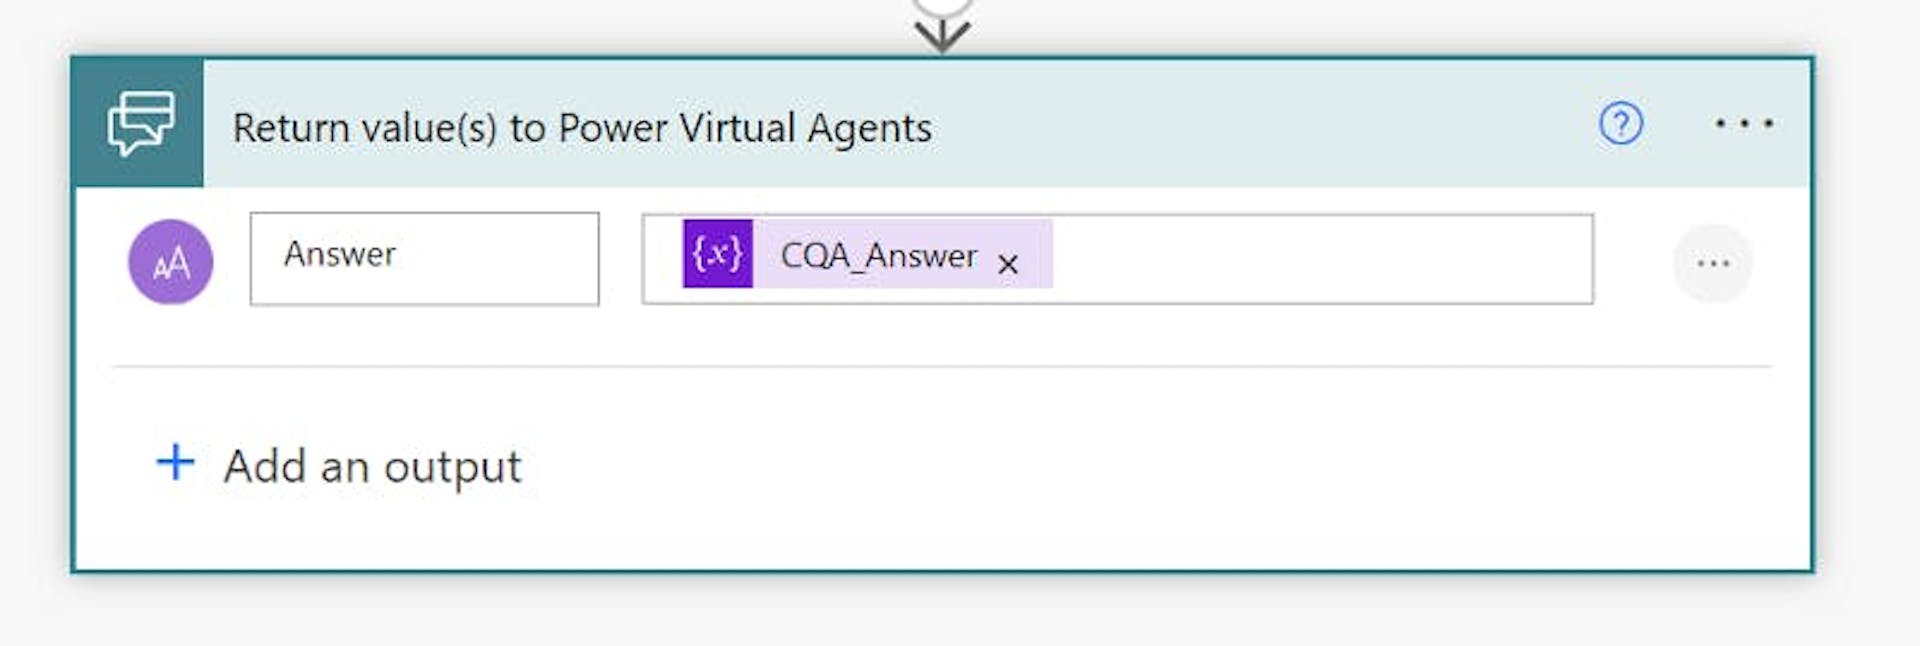 Return Value with Content of CQA_Answer Variable